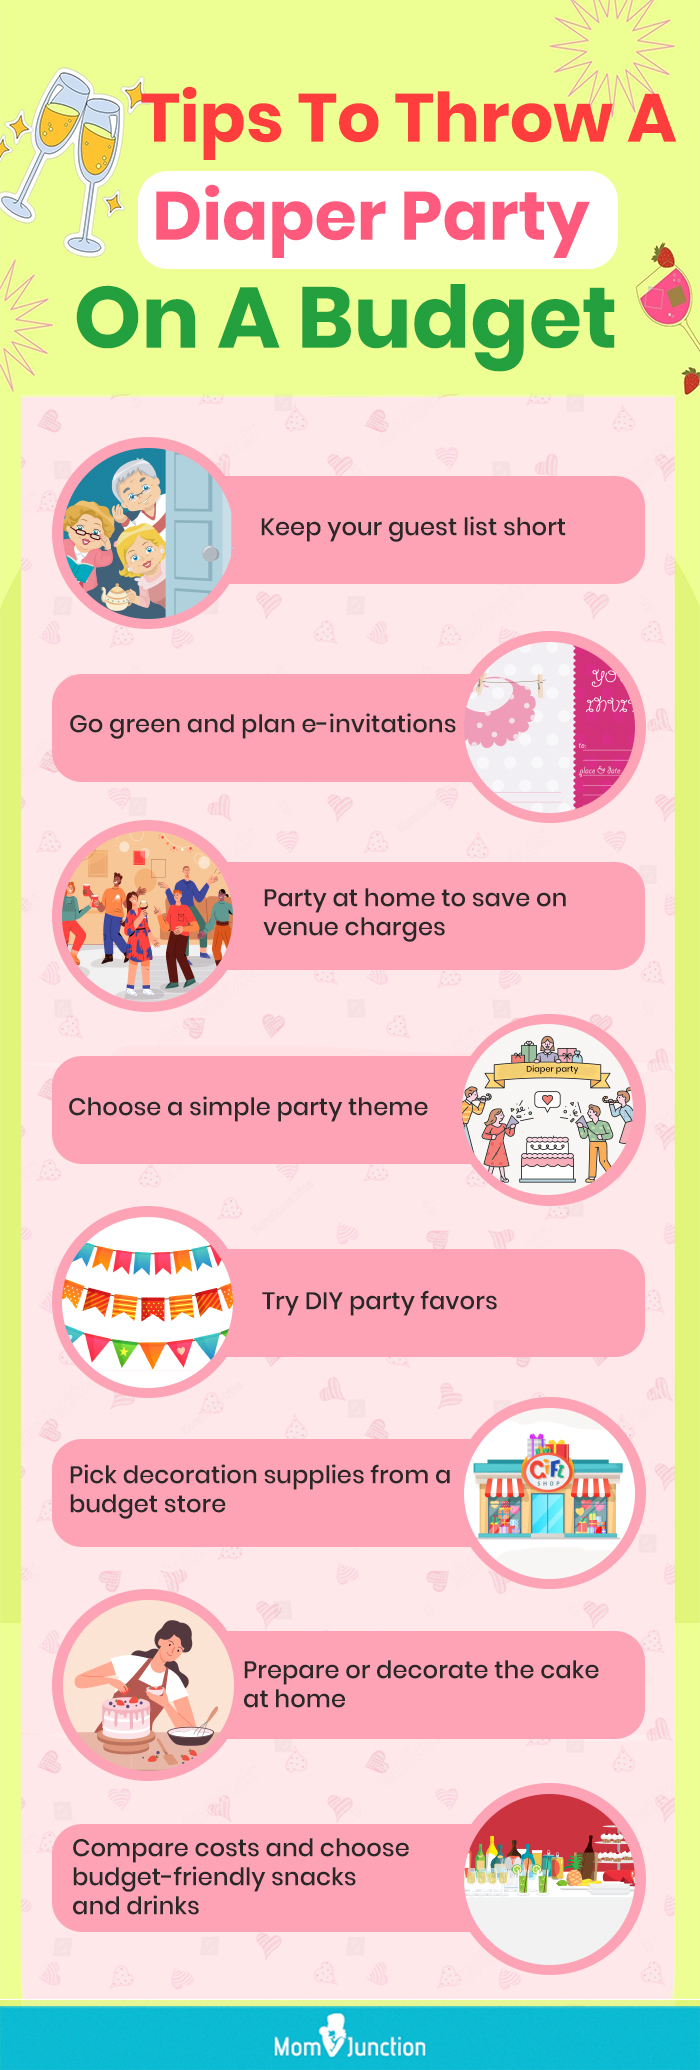 tips to throw a diaper party on a budget (infographic)